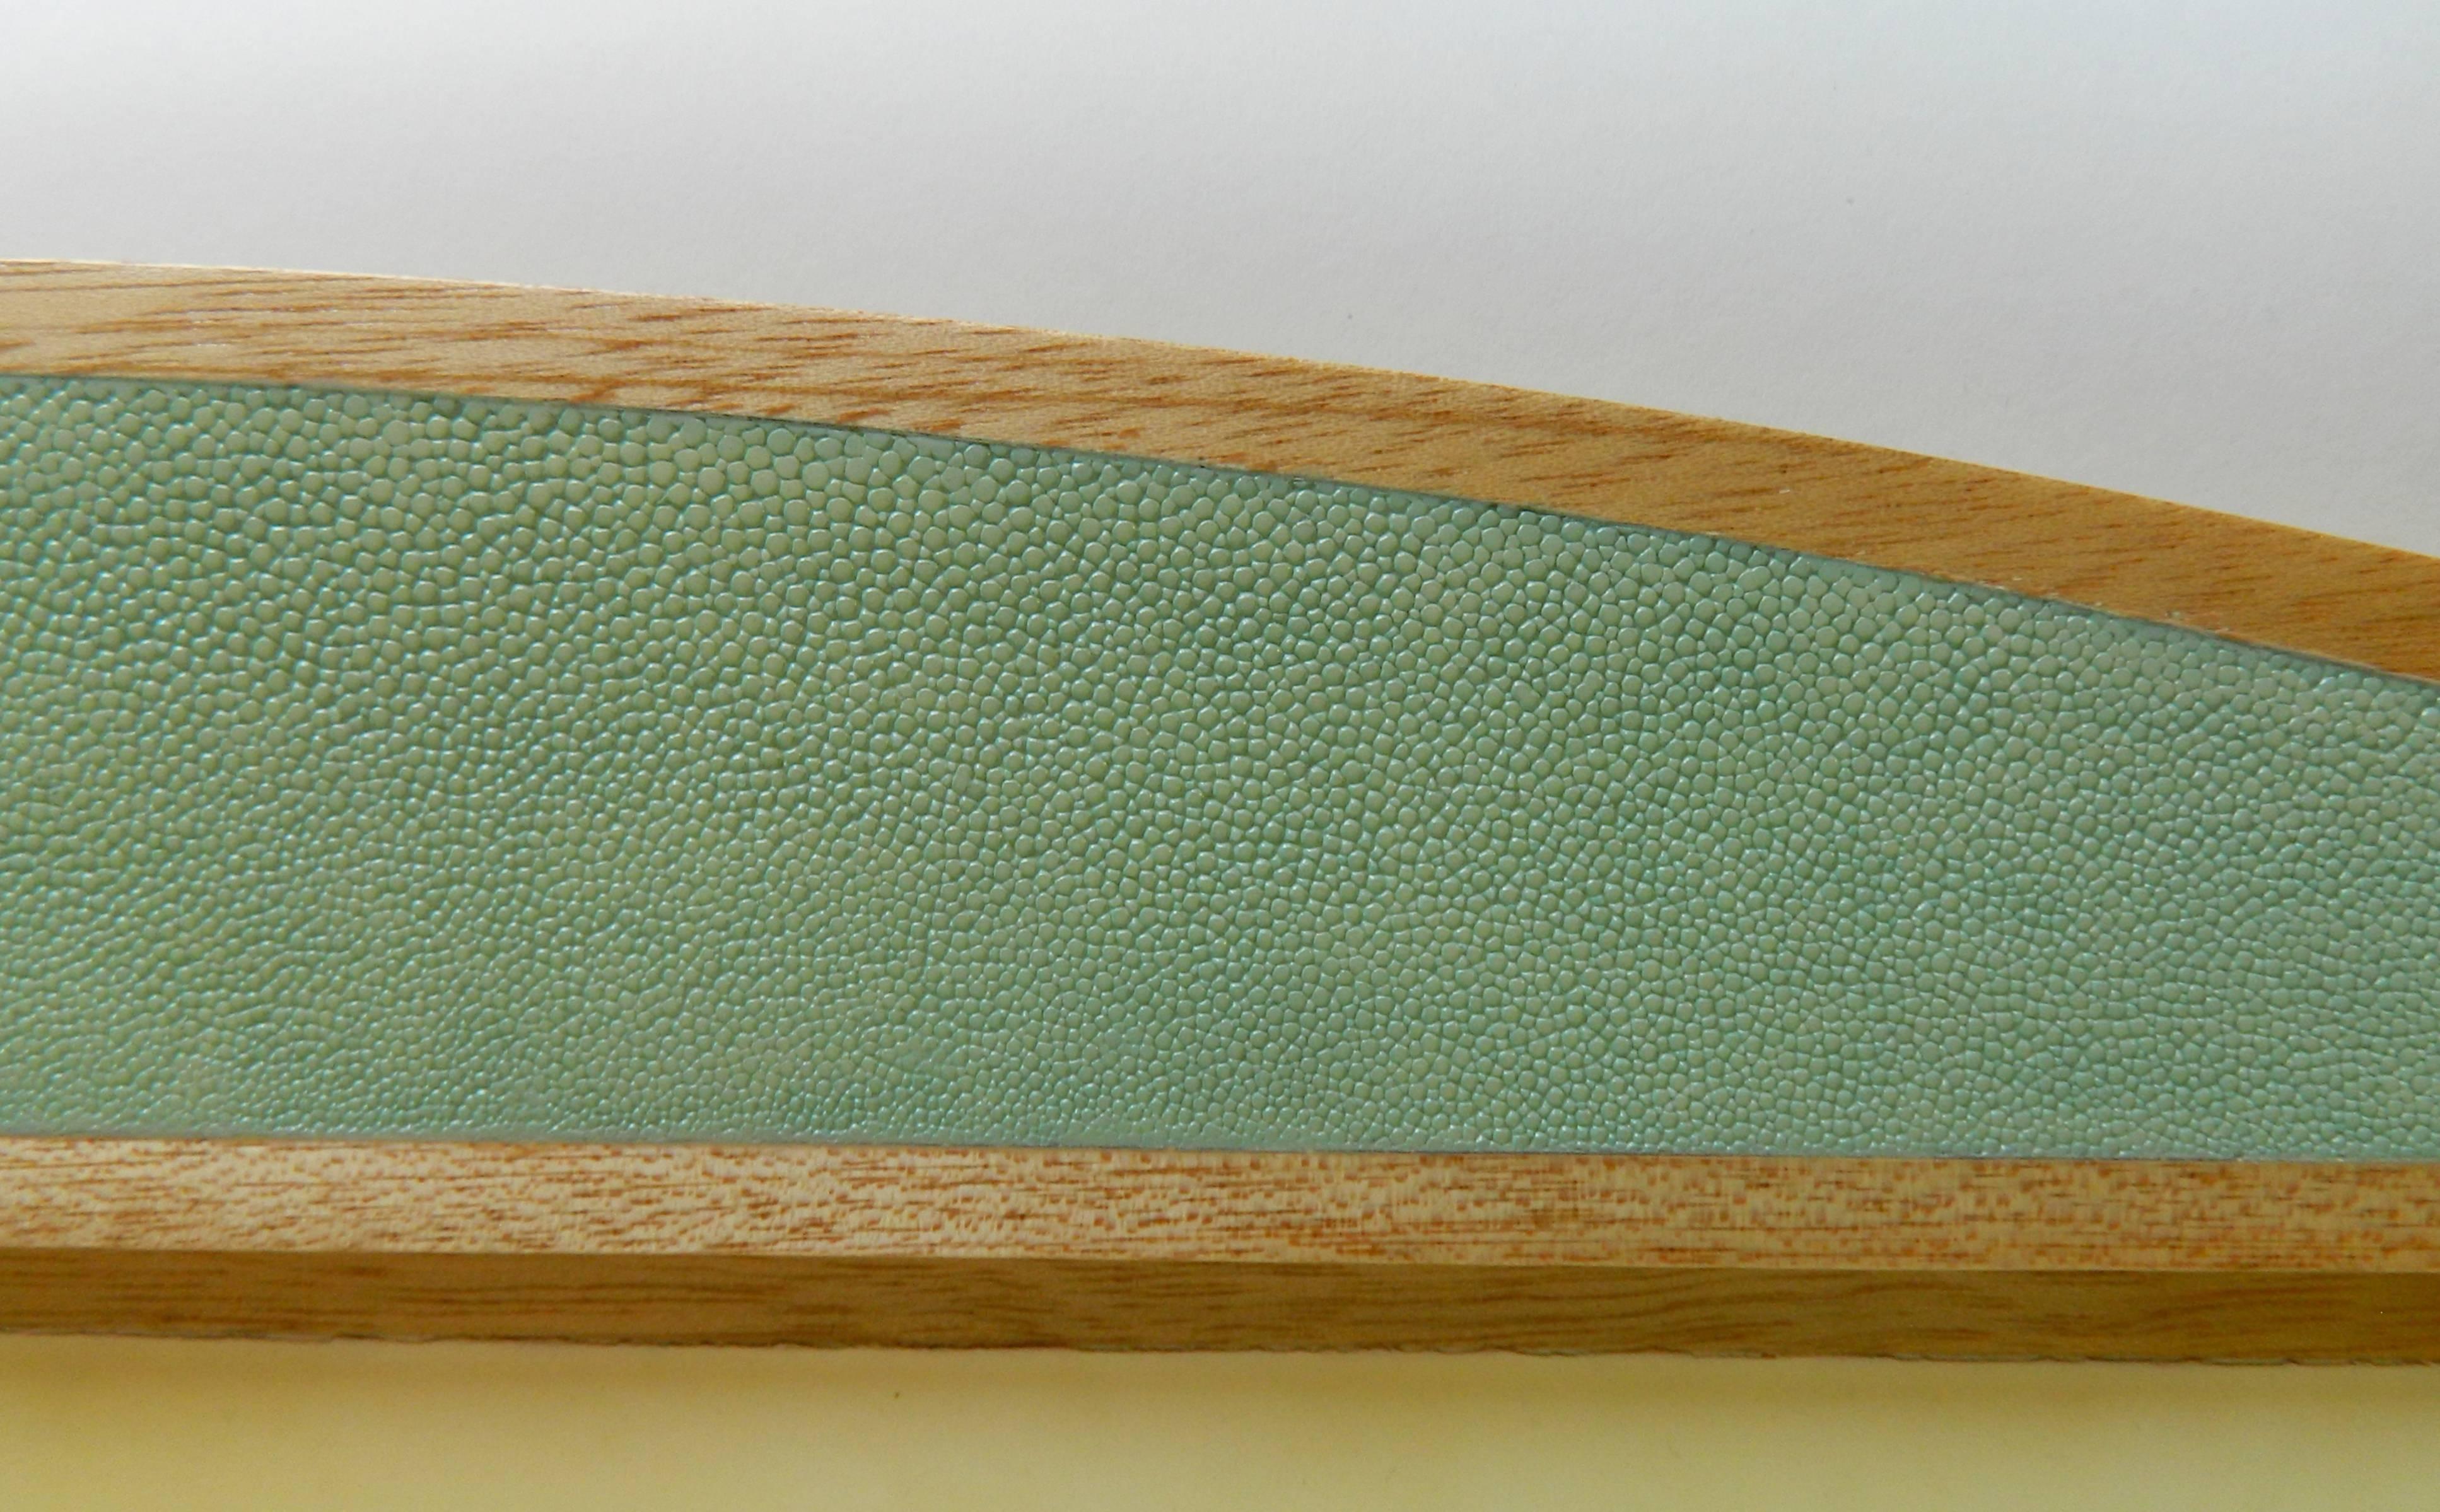 Unique desk blotter in light blue shagreen and natural parchment with felt backing 
Galart specializes in boxes, humidors, trays, lamps and other high quality objects. 
Please contact us for any other information.